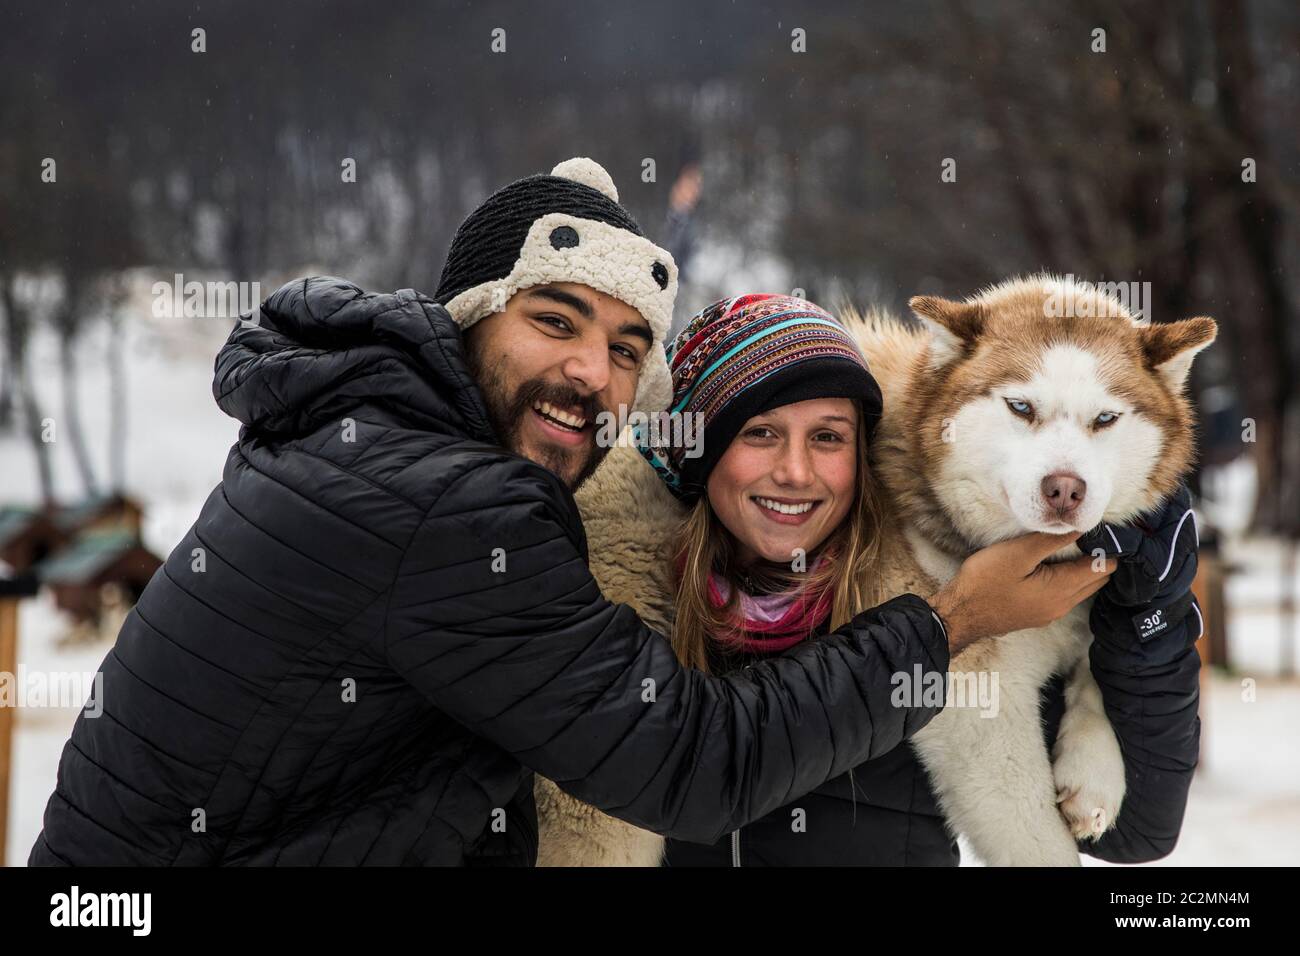 couple carrying a siberian dog in winter surrounded by snow. Stock Photo